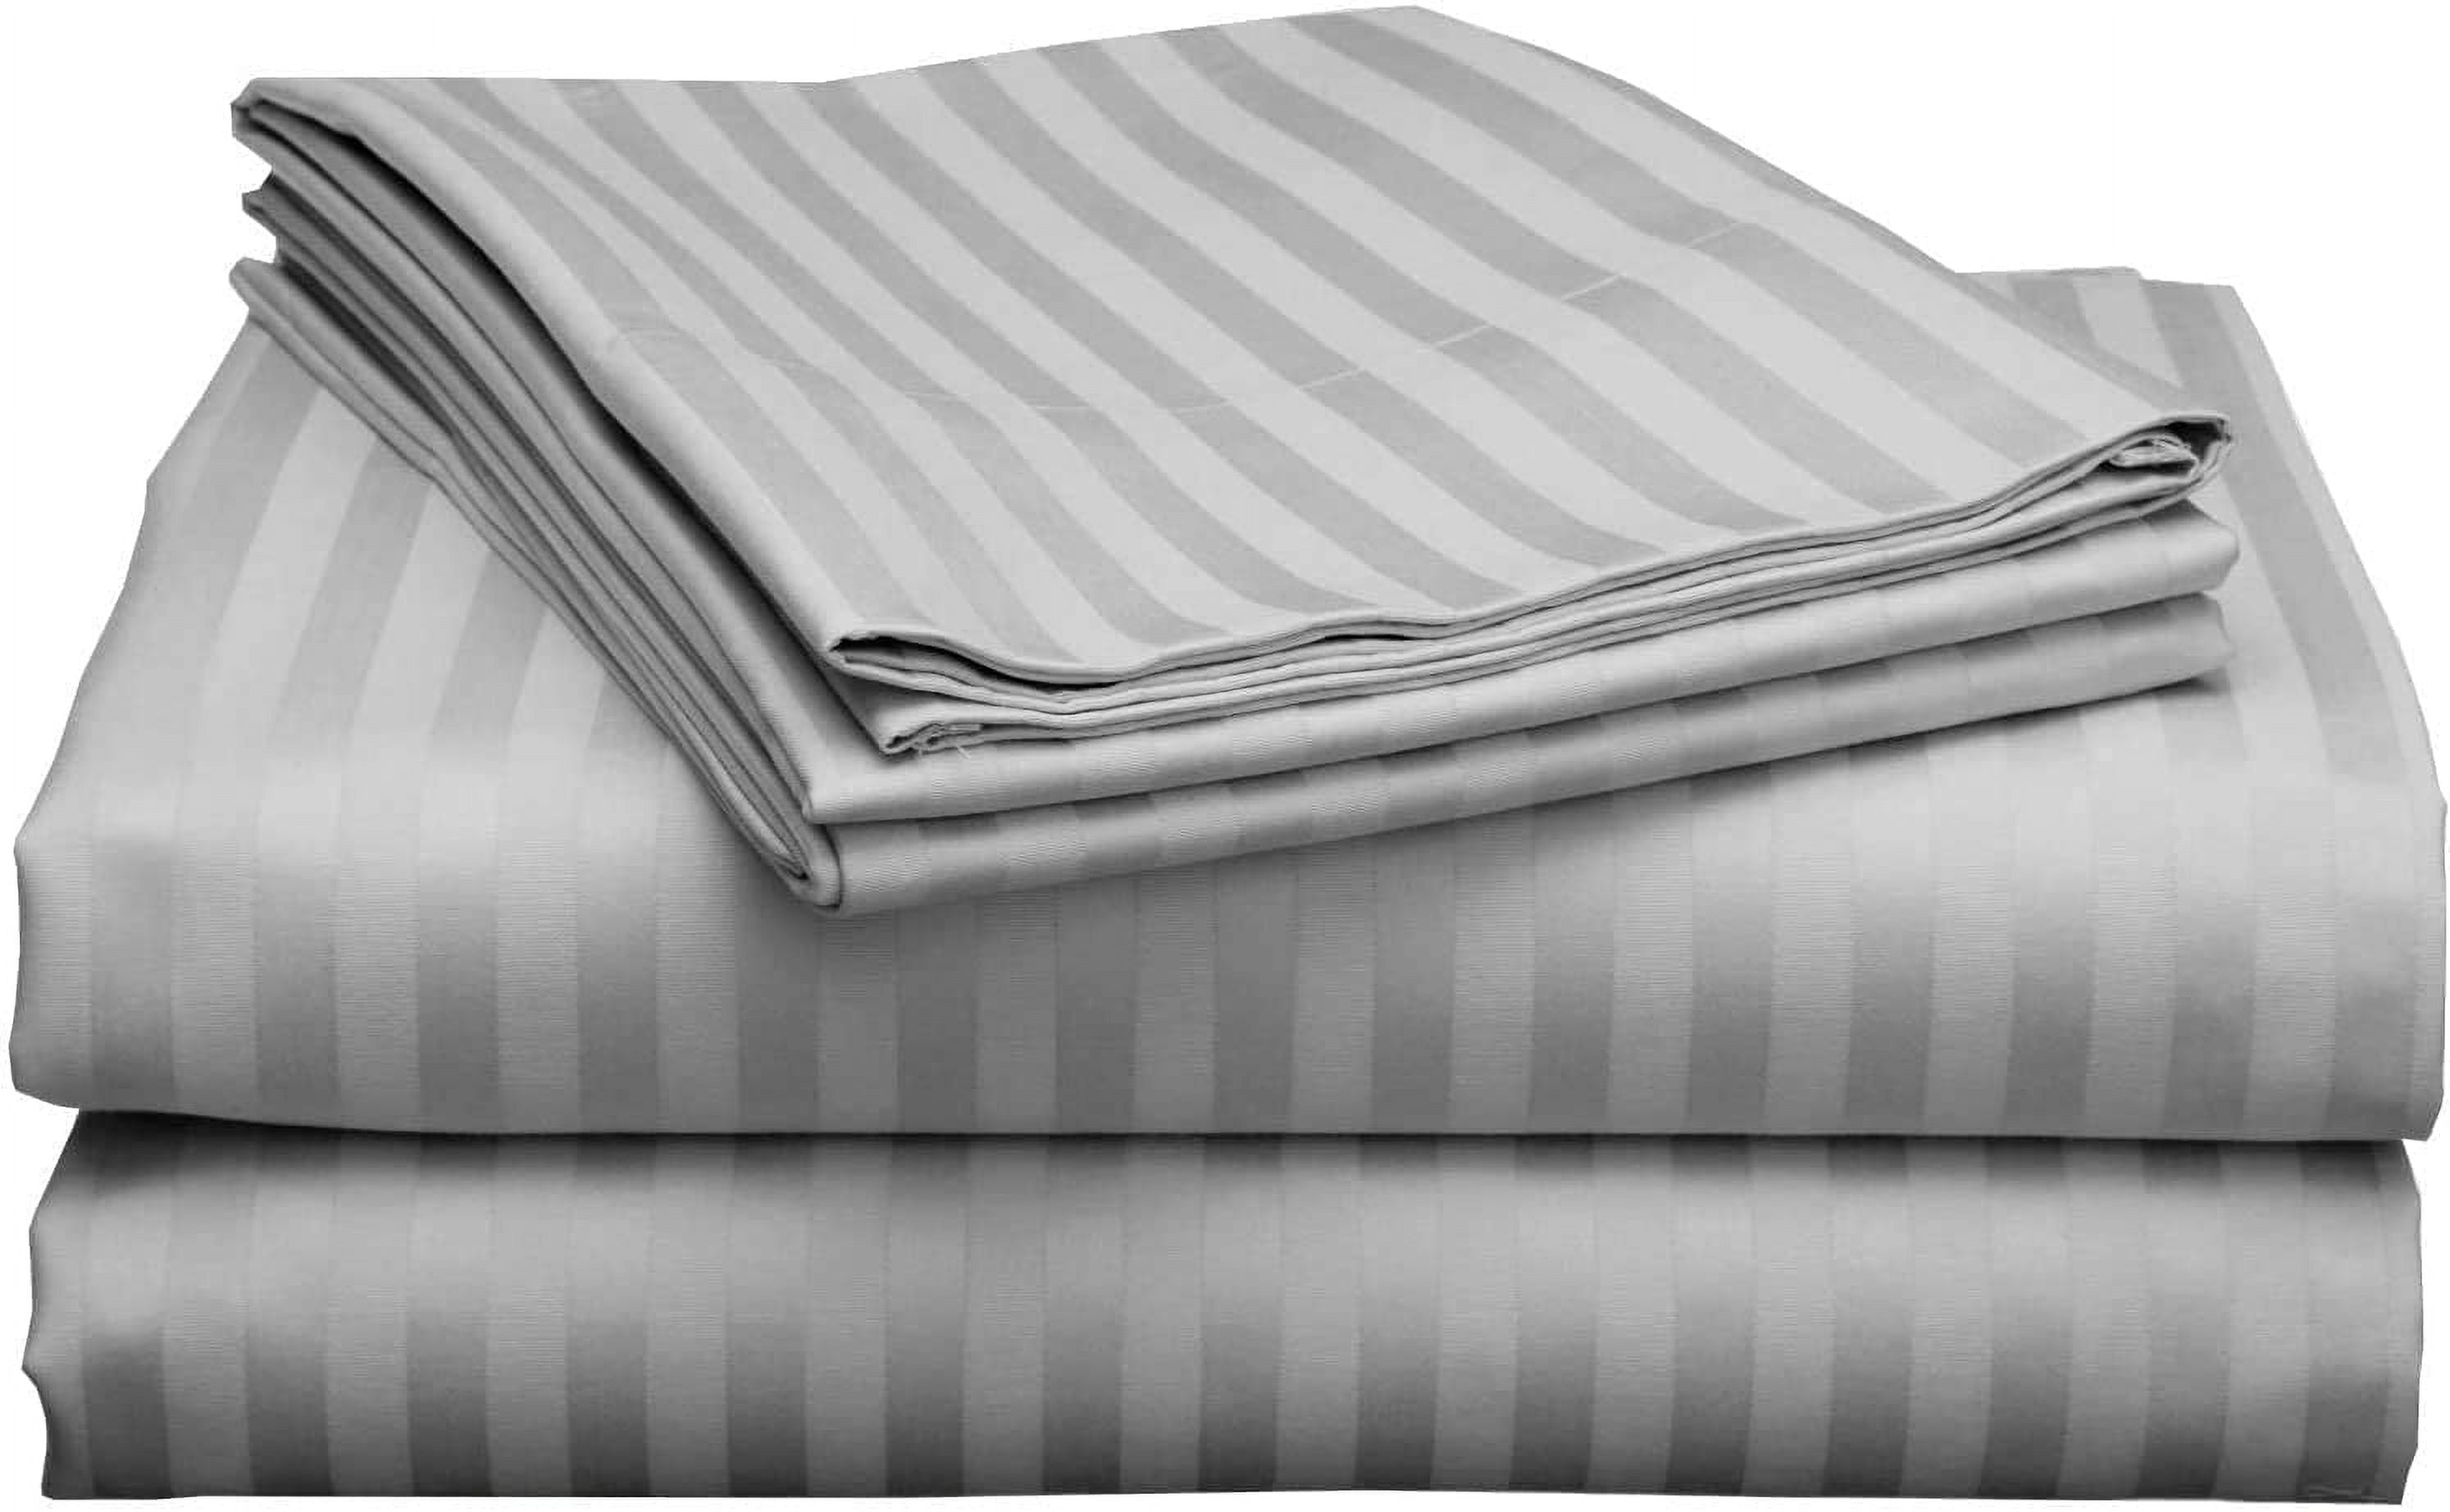 Split Head King Sheets for Adjustable Bed, 28 Top Split Sheets 800 Thread  Count 100% Egyptian Cotton, 4 Piece with 18 Inch Deep Pocket Sheets (Split  Top King, Medium Blue Solid) 